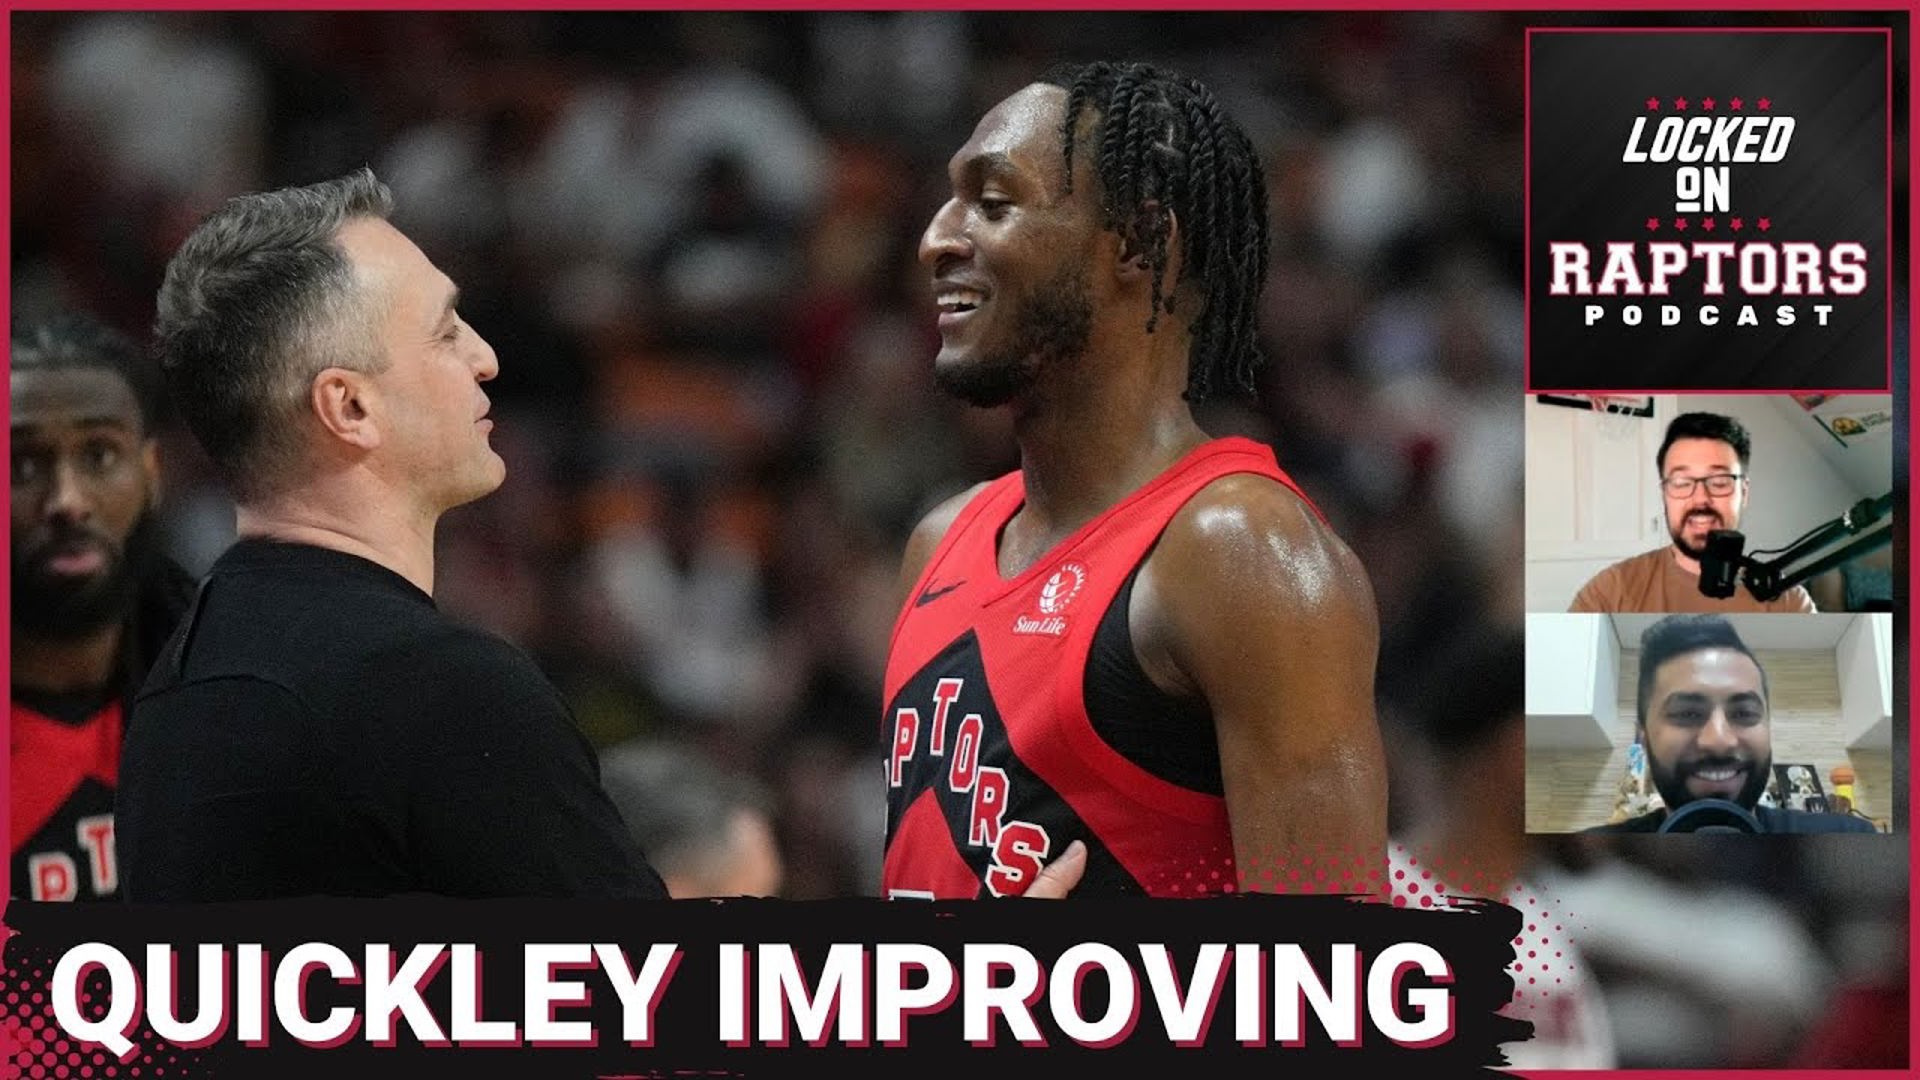 In Episode 1640, Sean Woodley is joined by Vivek Jacob (Raptors in 7, Sportsnet) to chat about Toronto Raptors guard Immanuel Quickley